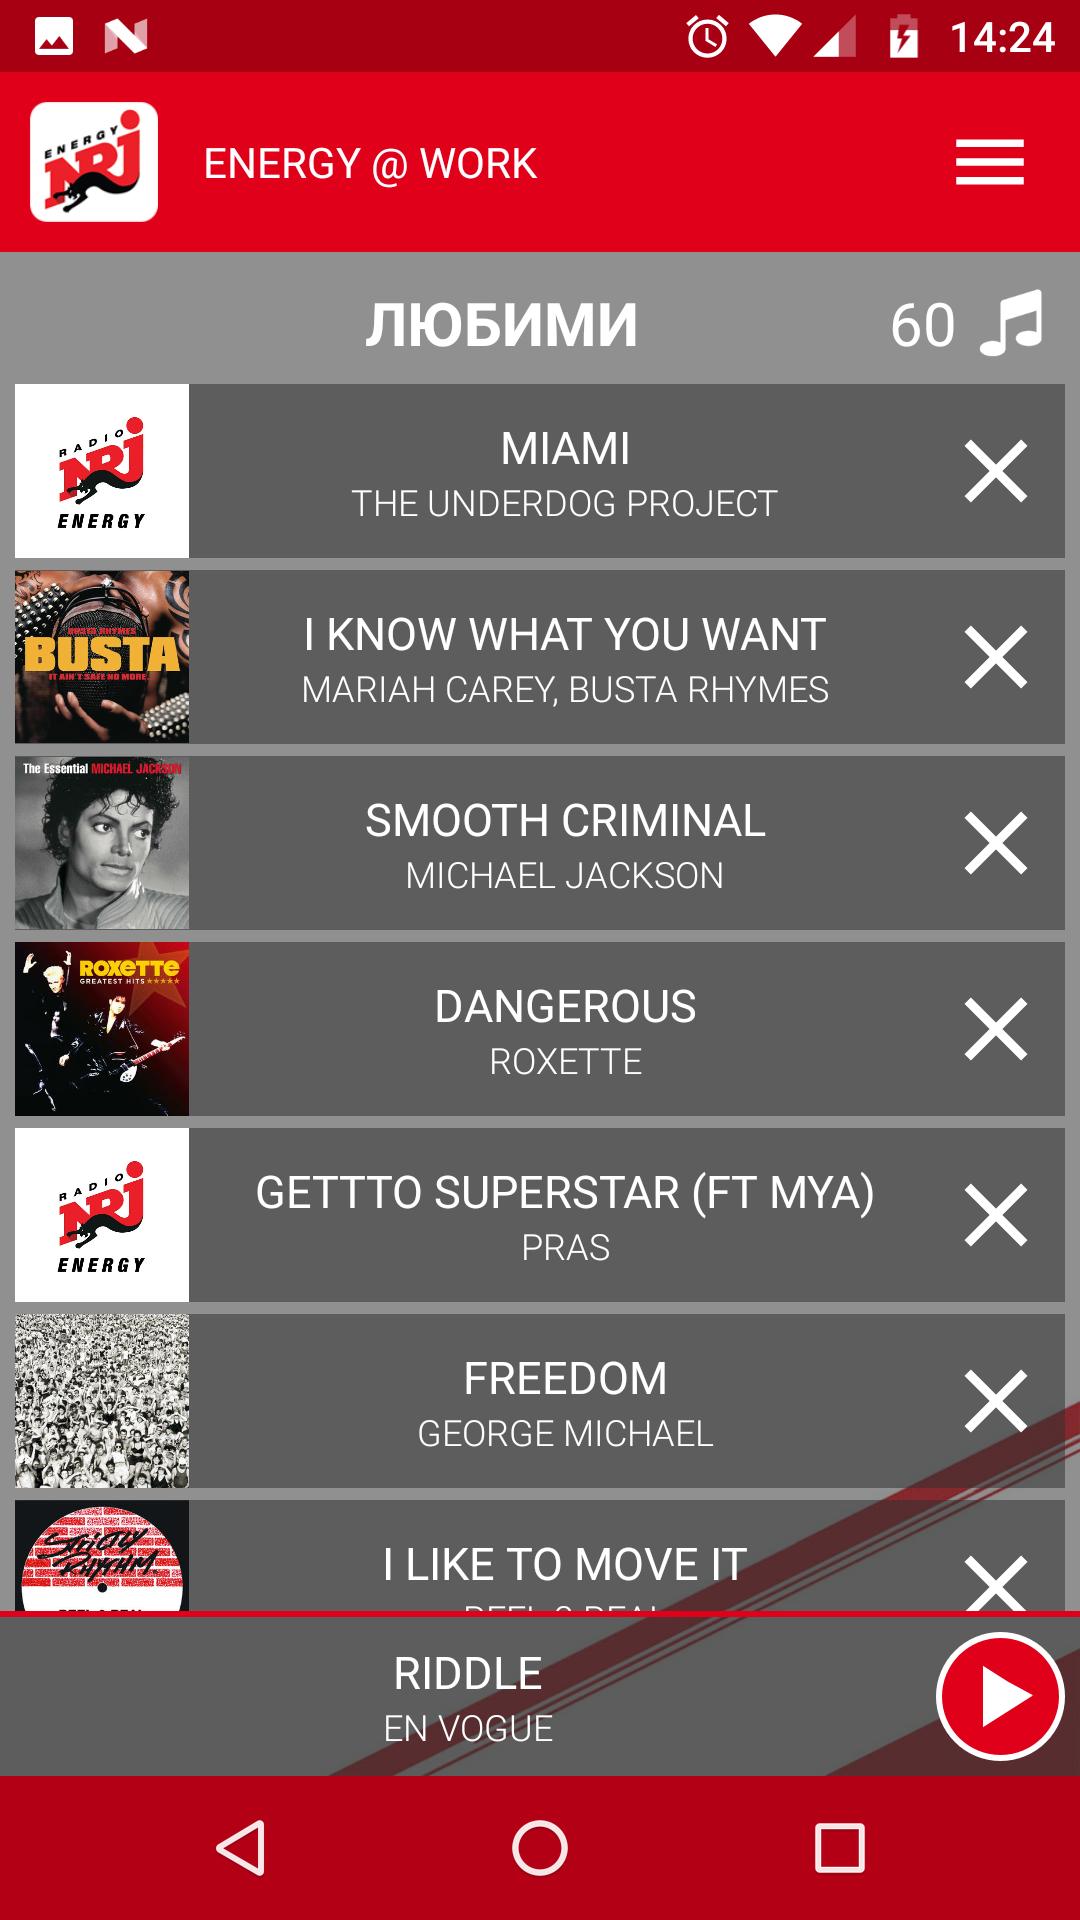 Radio ENERGY for Android - APK Download